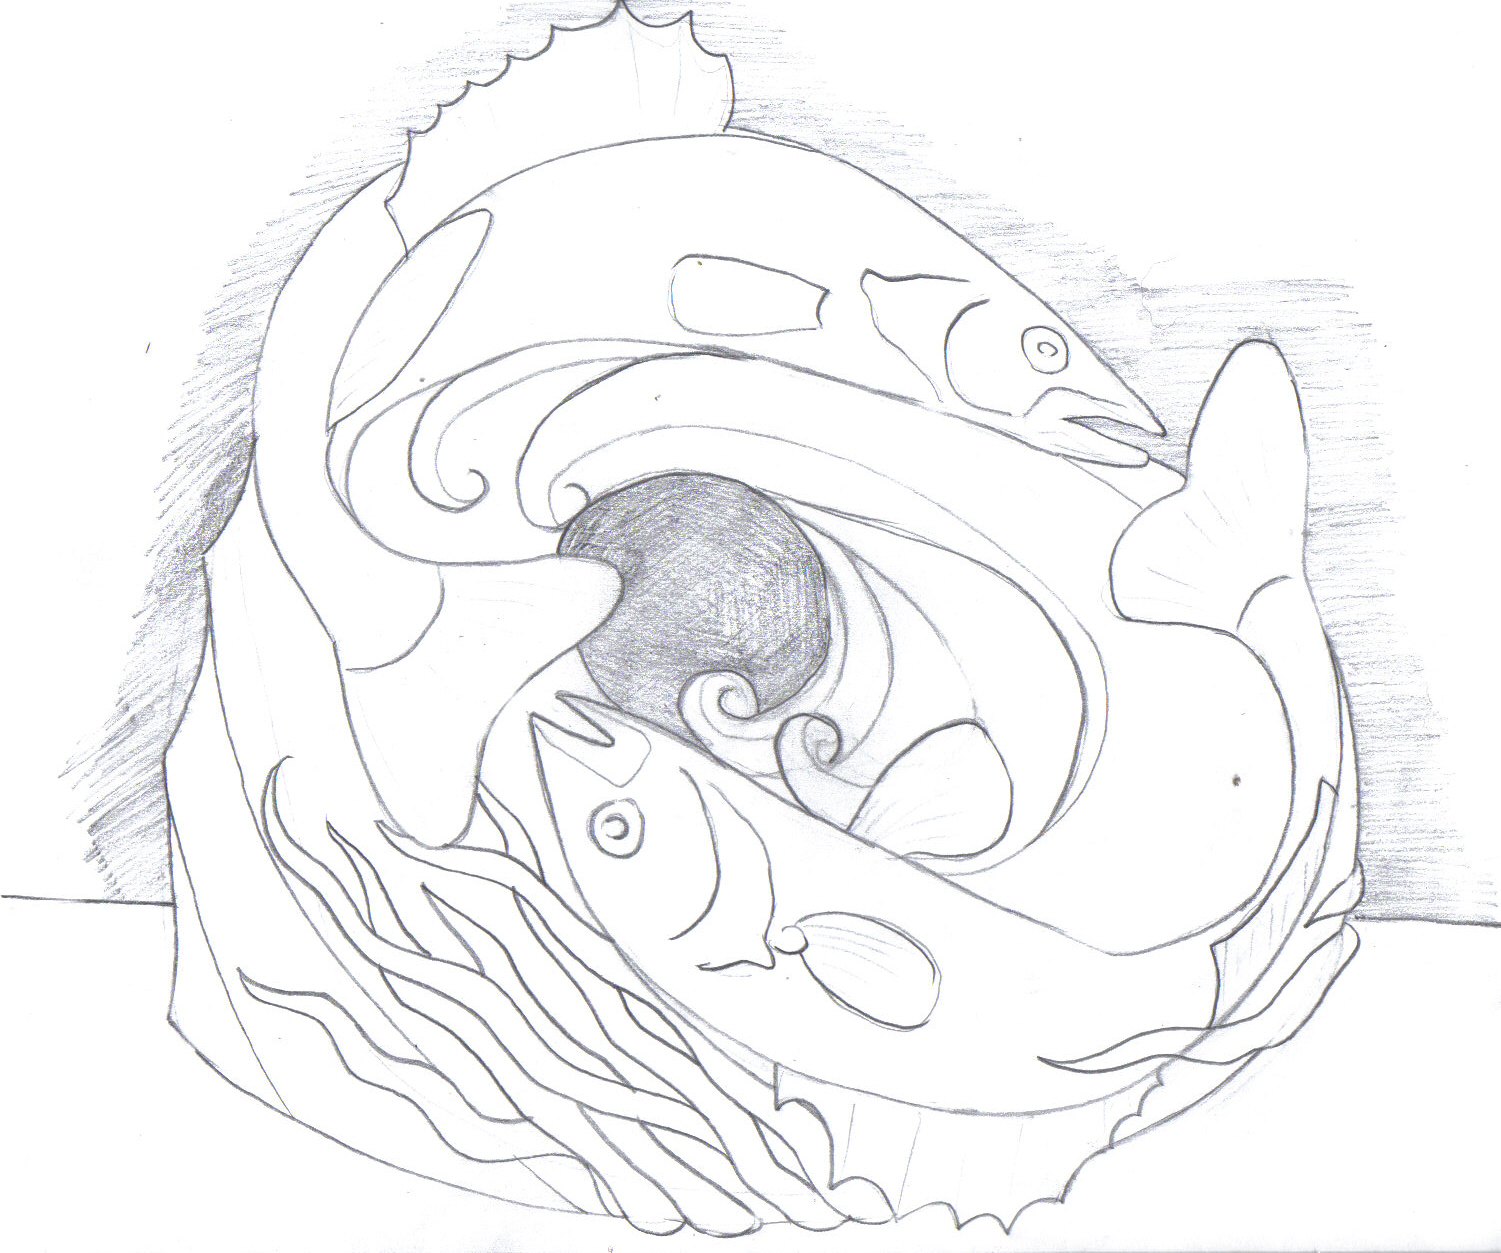   Working sketch for  Mobius Fish    8'x8'x8'  Snow Sculpture  St. Paul Winter Carnival&nbsp;  2014 